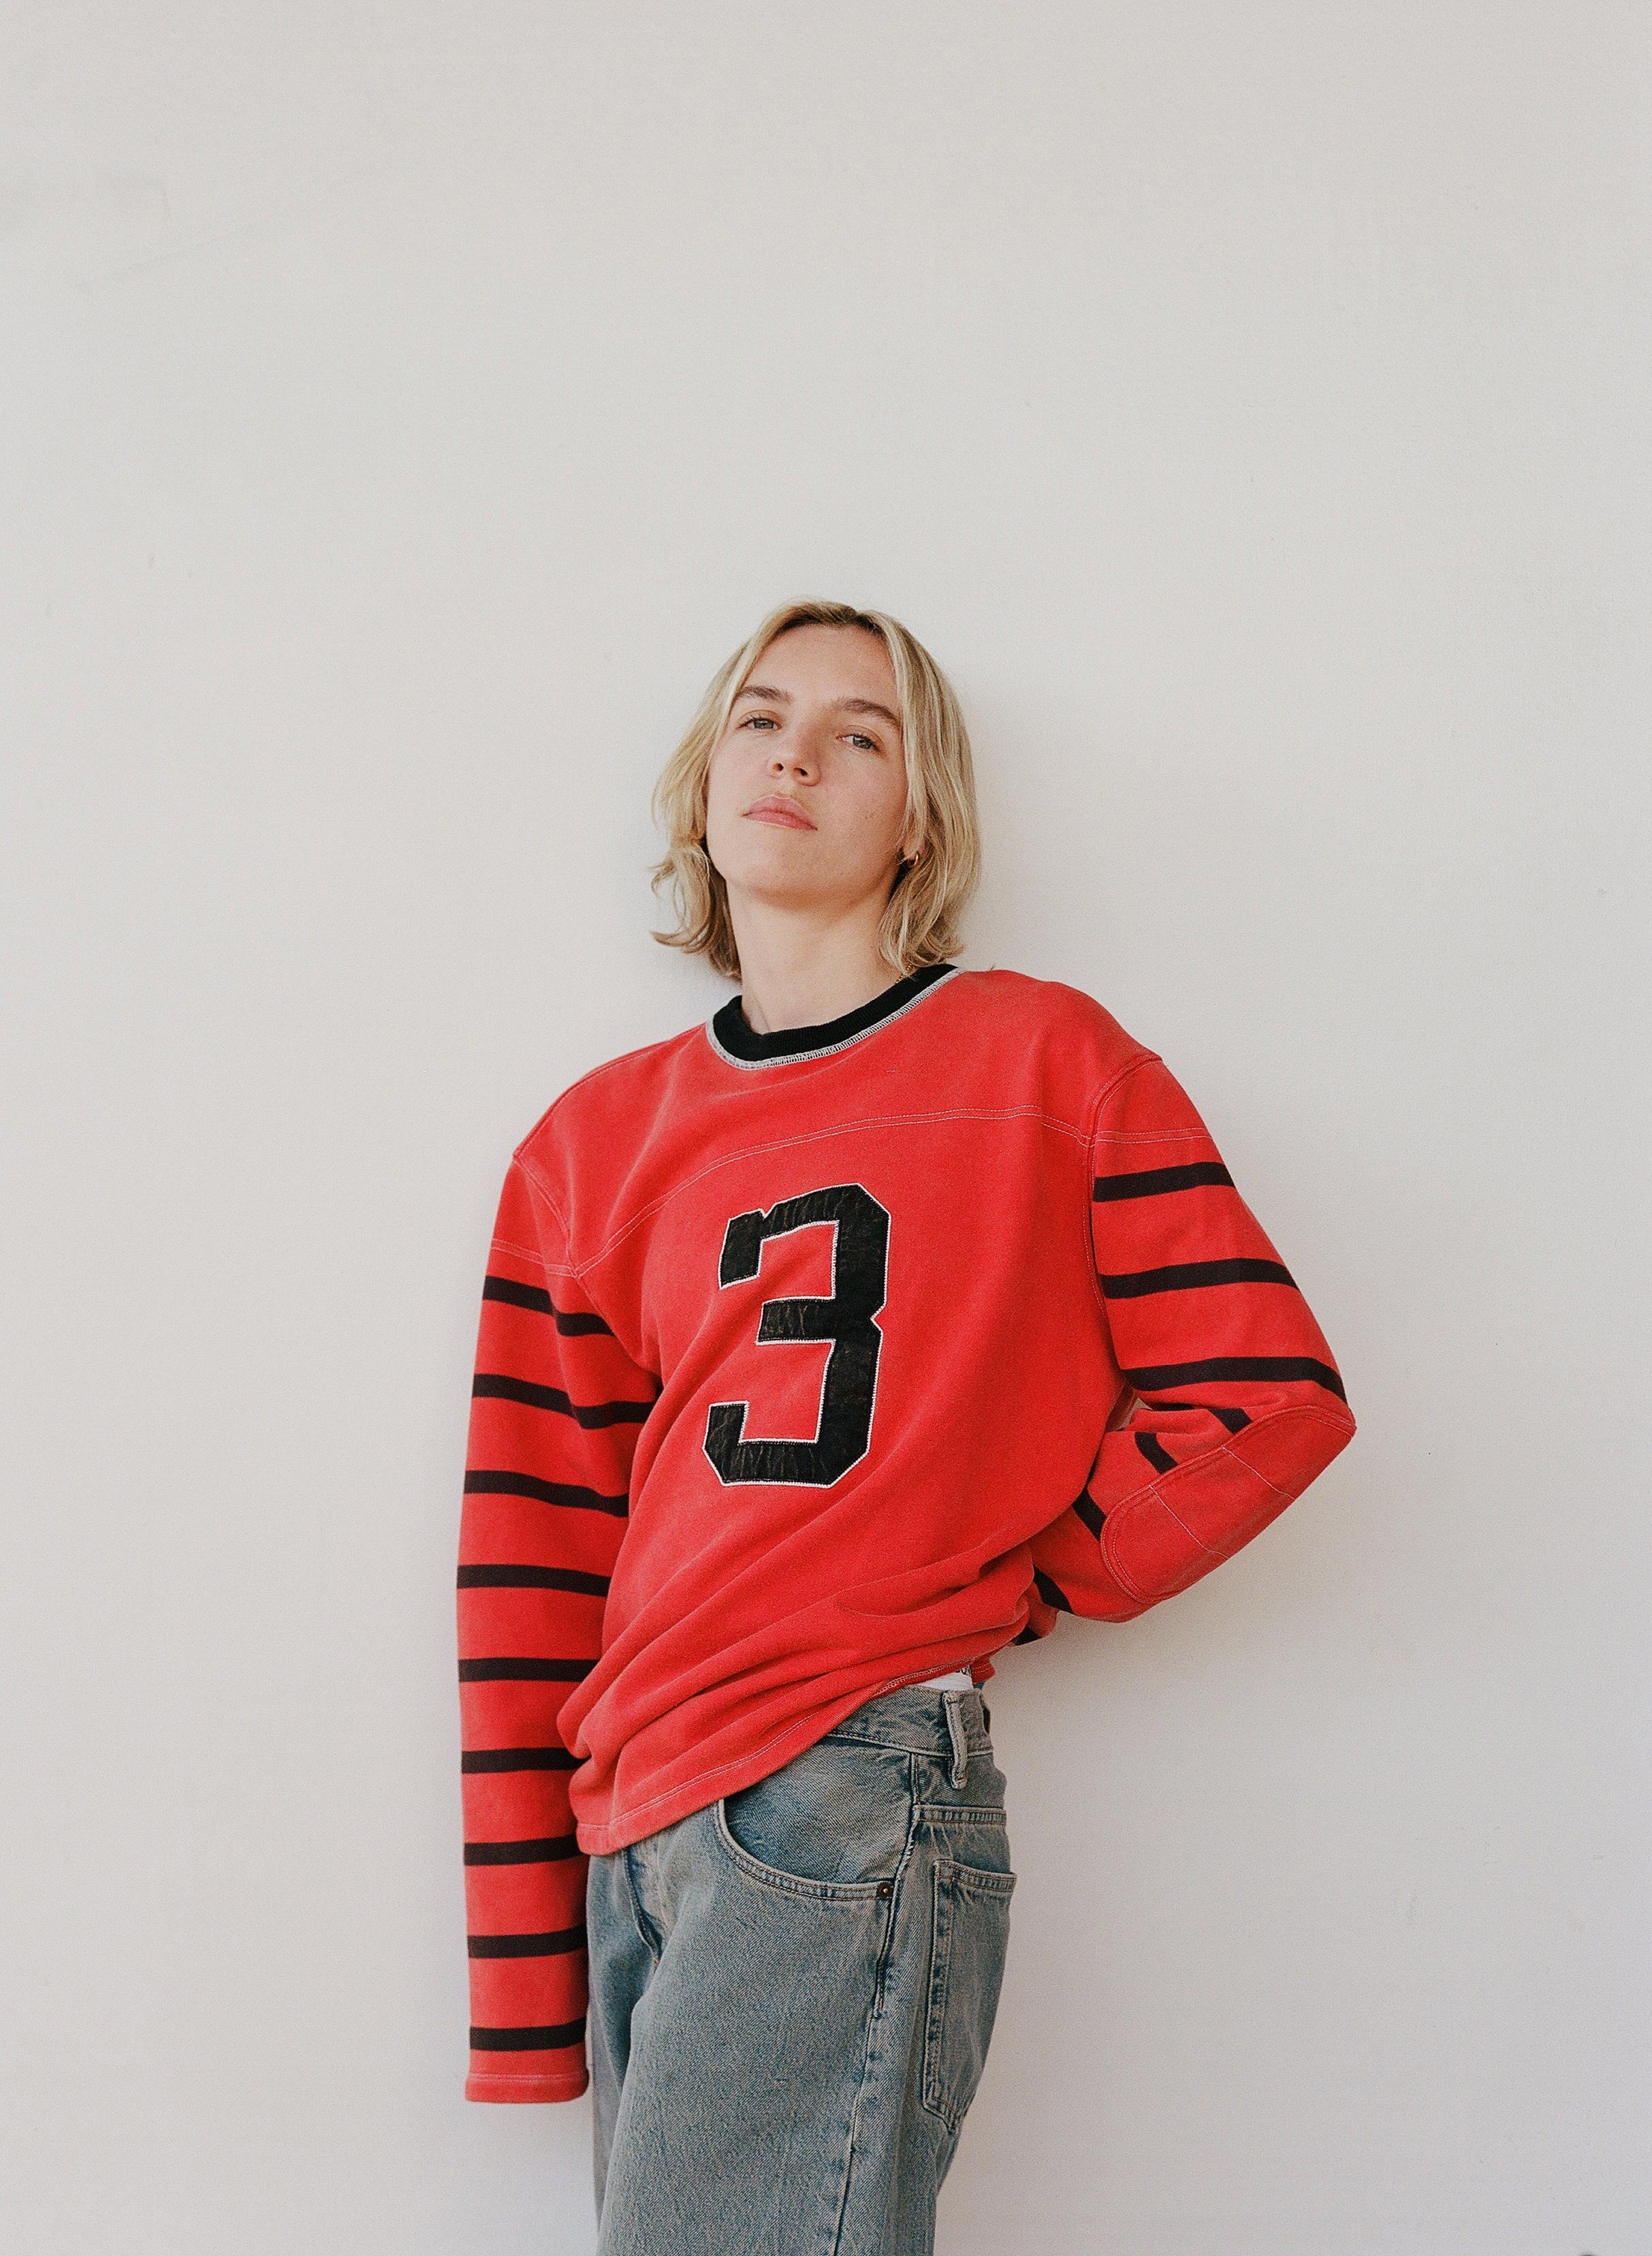 members only presale passcode for The Japanese House face value tickets in New York